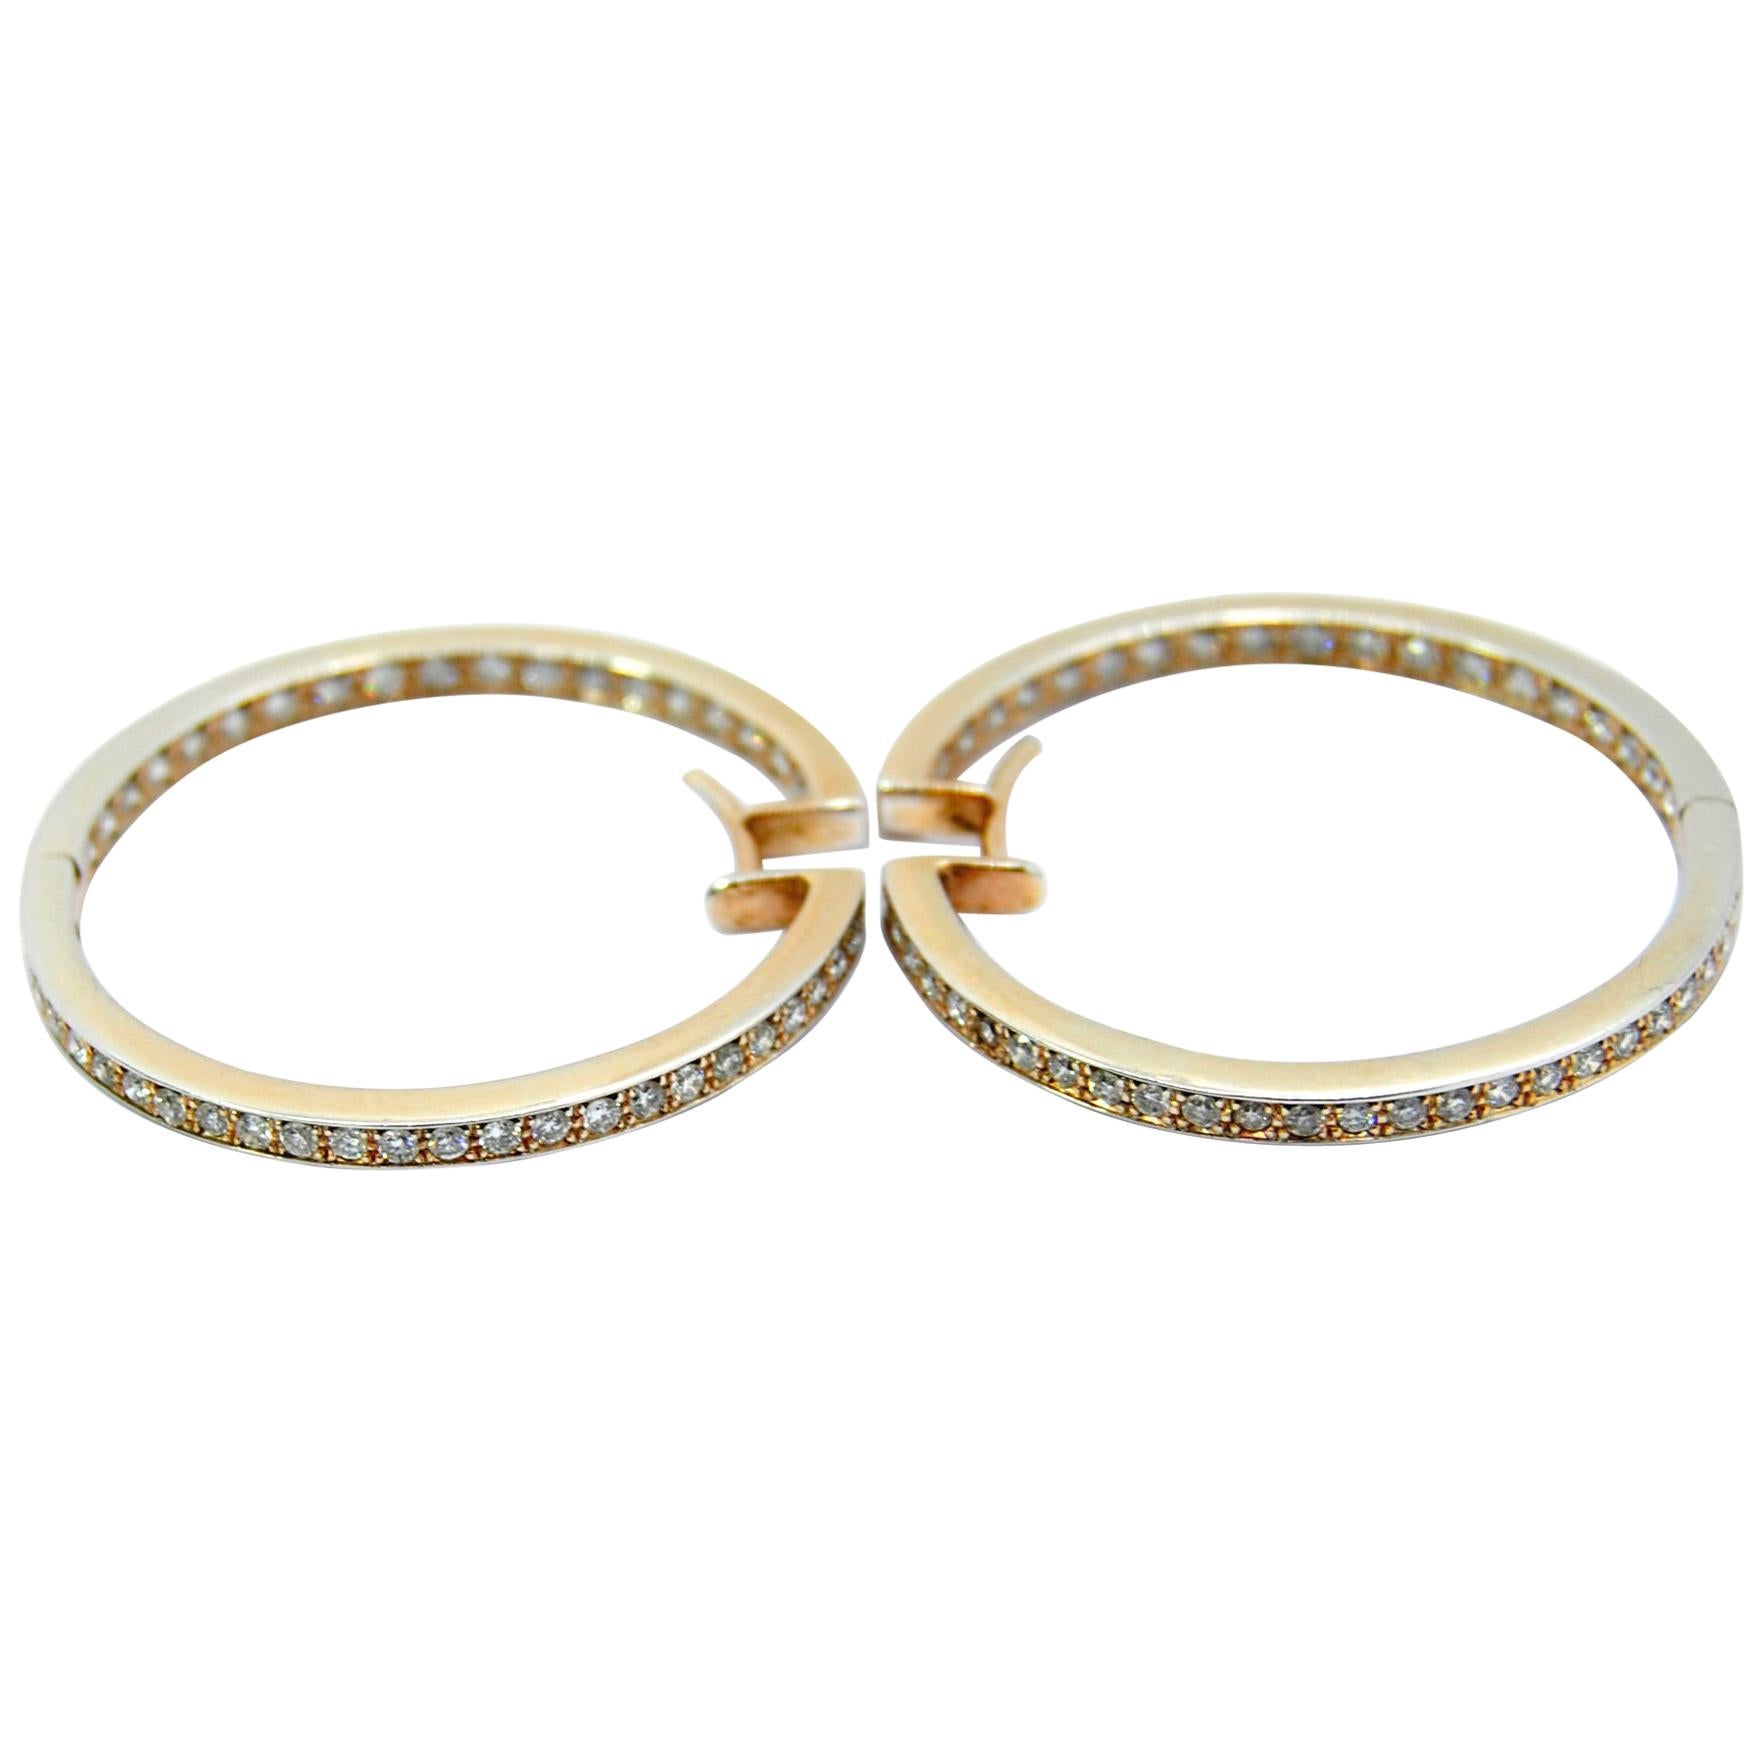 Diamond Hoops Earring in white and yellow 18kt gold and 1.60ct of white diamonds